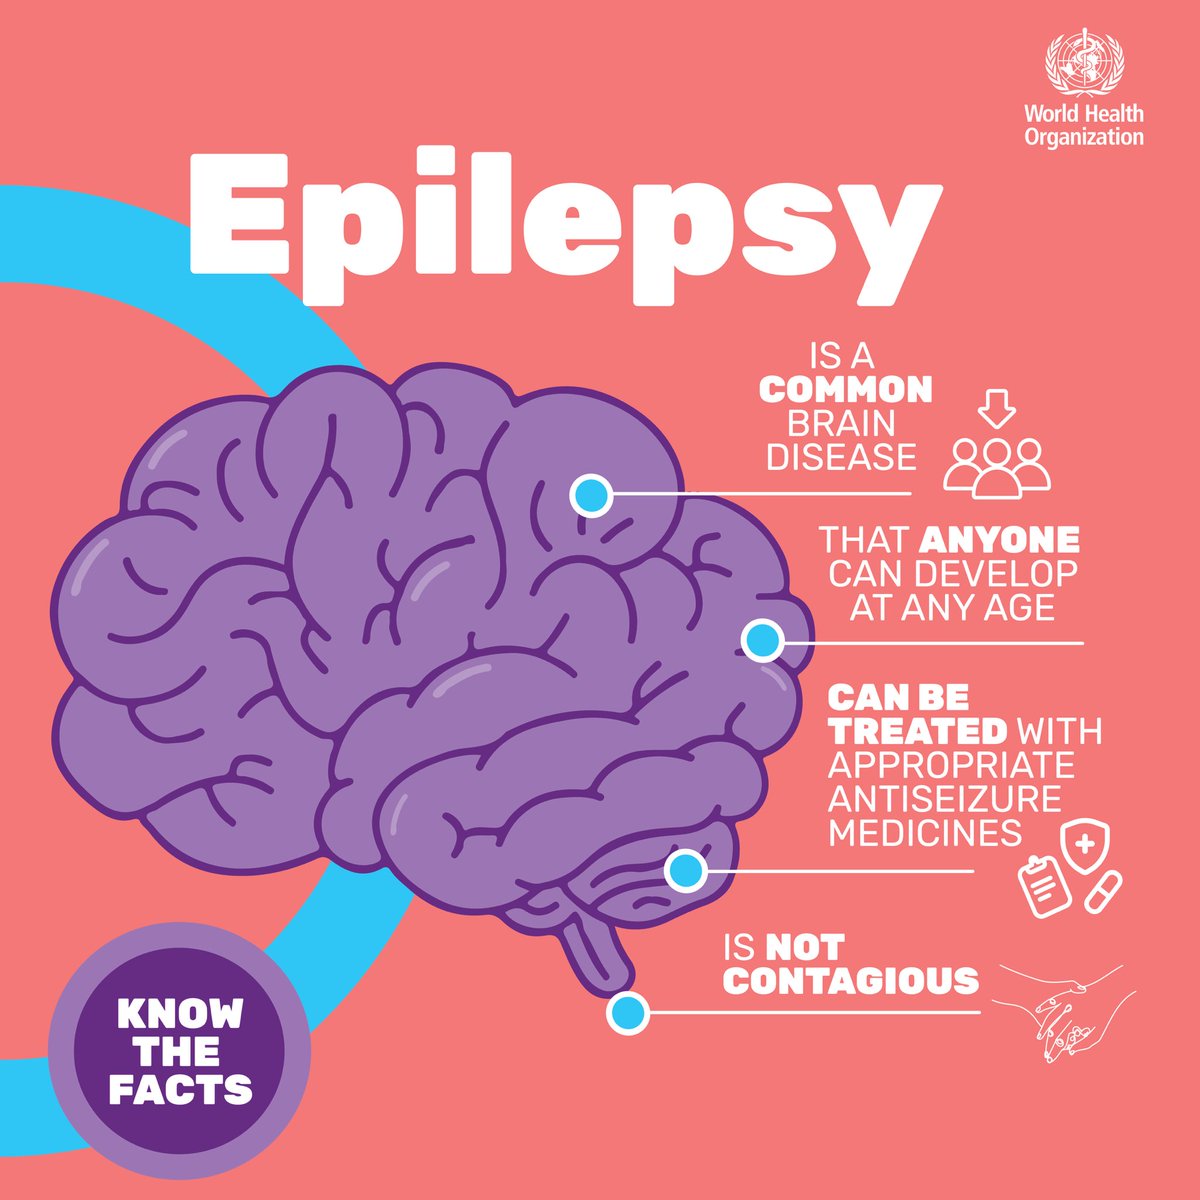 Today is World #EpilepsyDay #Epilepsy is one of the most common neurological disorders. Anyone can develop it at any age. It’s not contagious & it's treatable. Know the facts so you can help tackle the myths & misconceptions that lead to stigma & discrimination